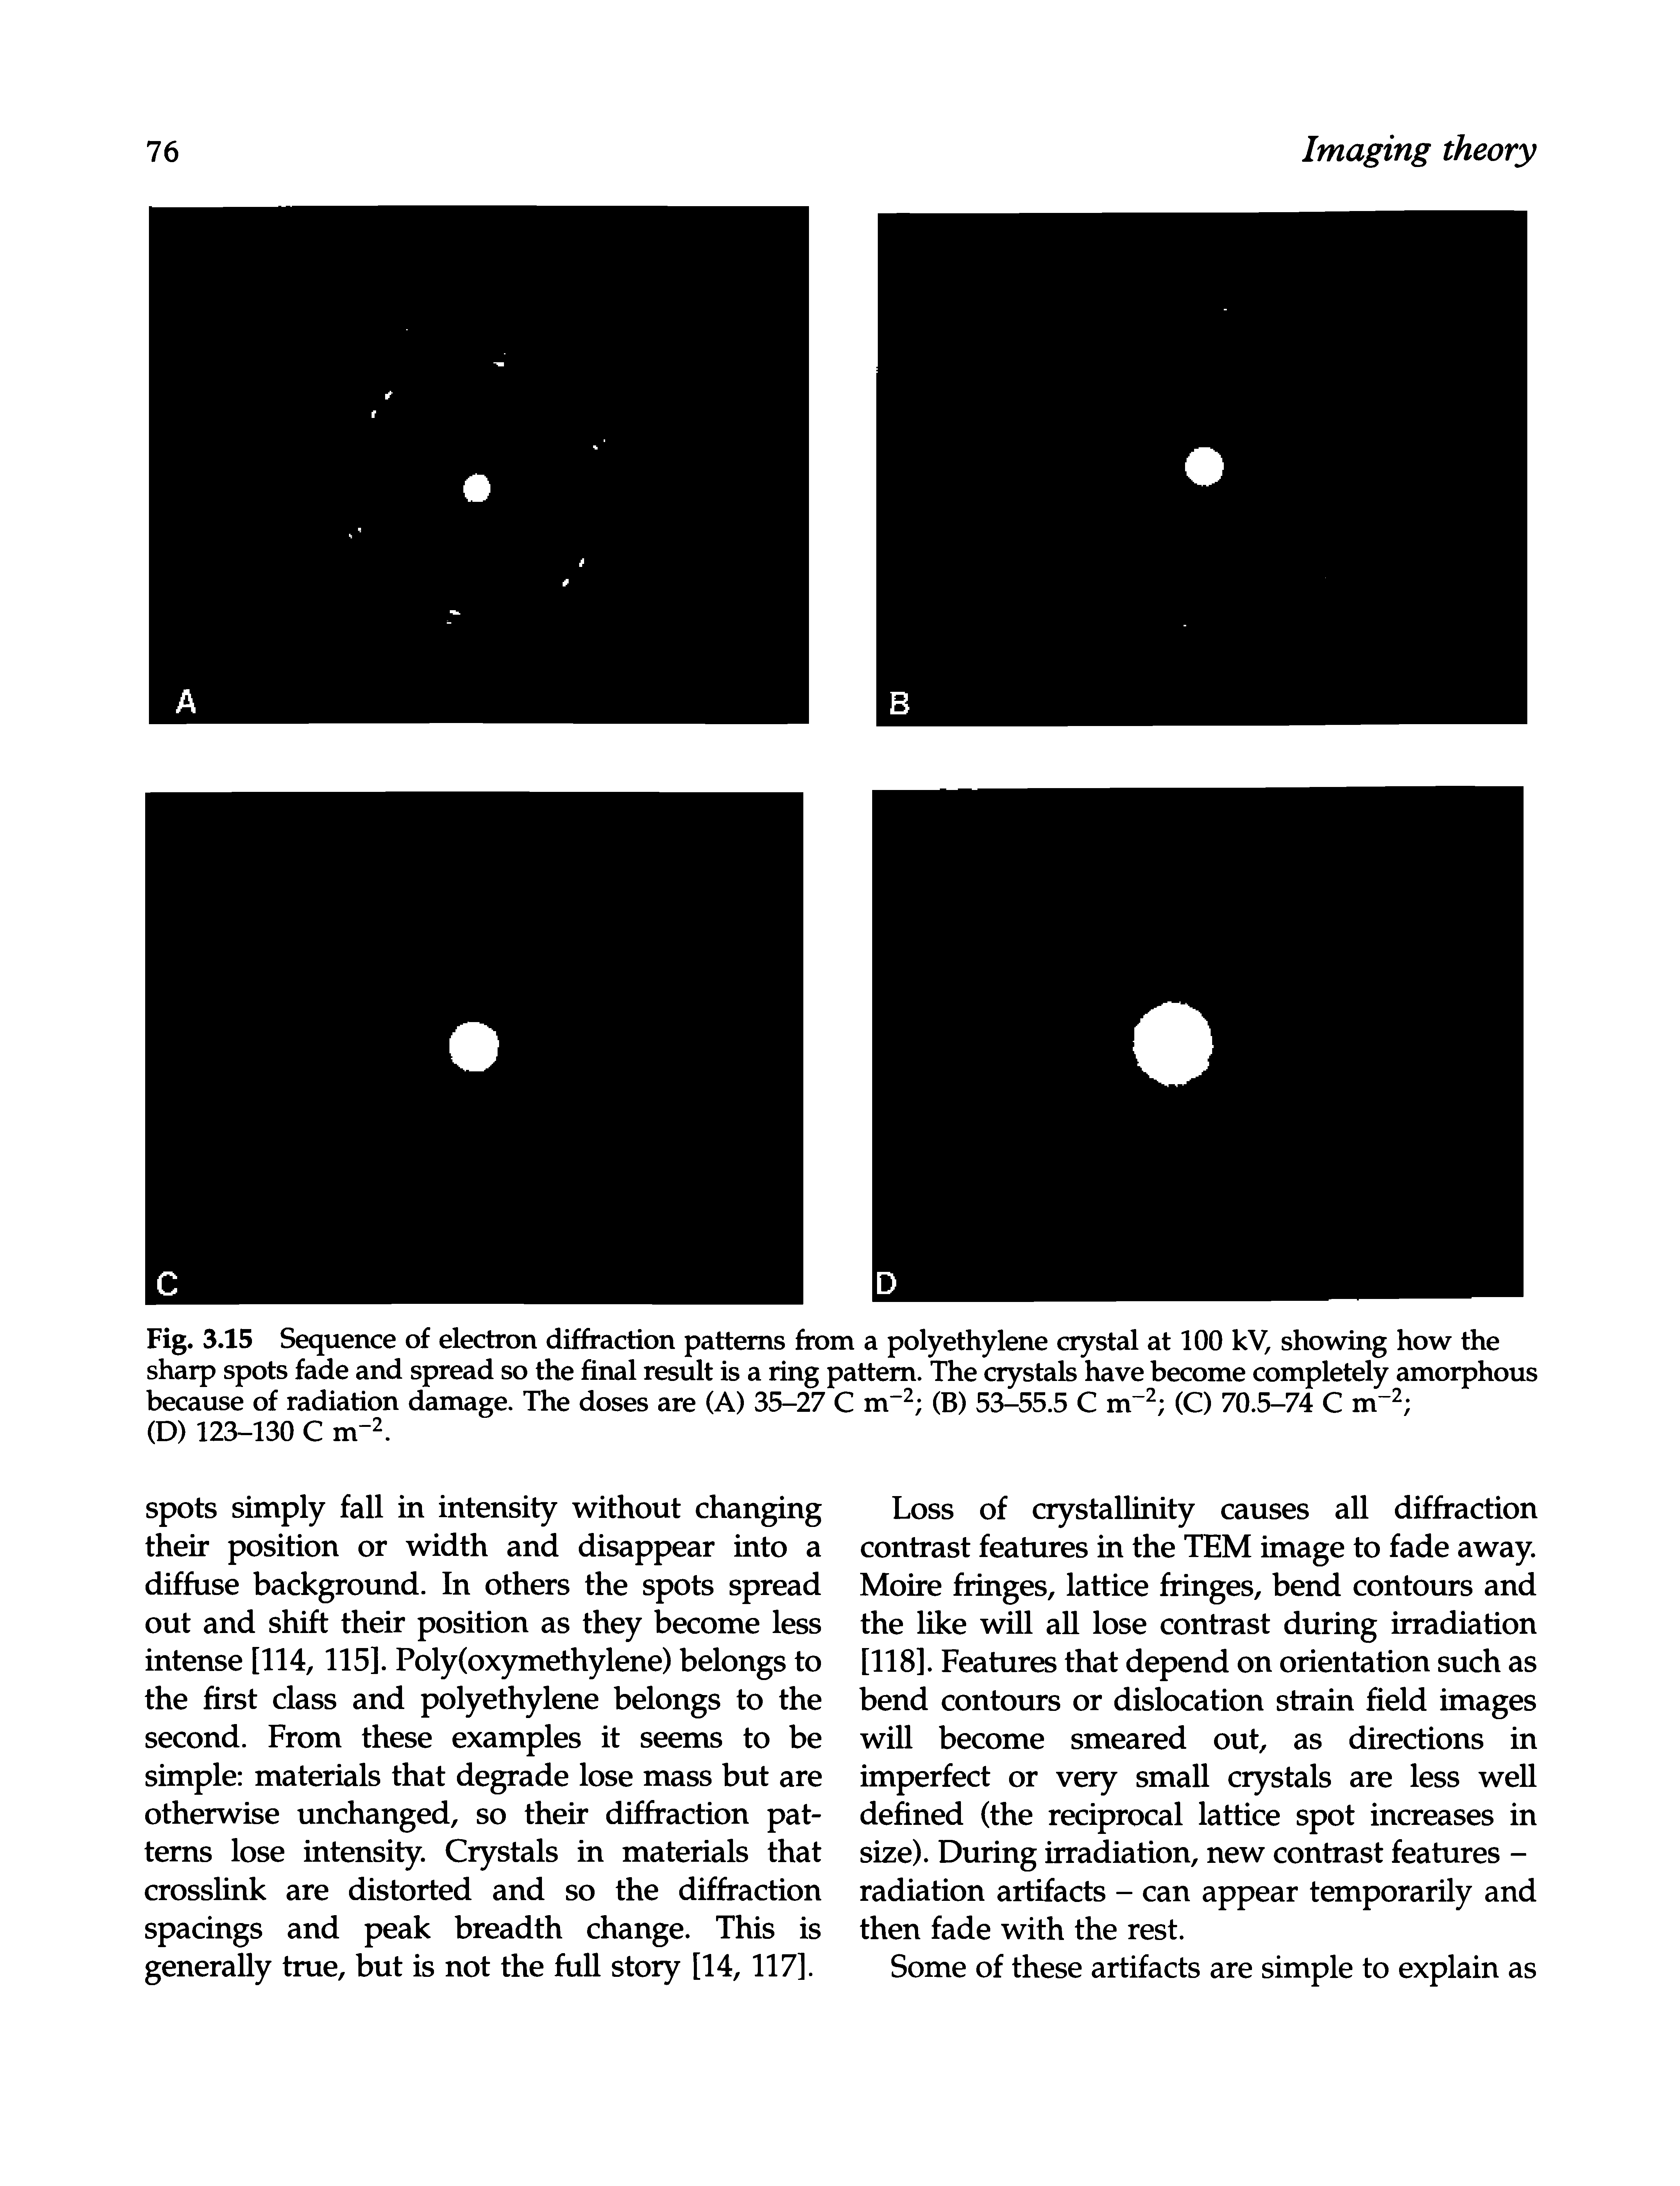 Fig. 3.15 Sequence of electron diffraction patterns from a polyethylene crystal at 100 kV, showing how the sharp spots fade and spread so the final result is a ring pattern. The crystals have become completely amorphous because of radiation damage. The doses are (A) 35-27 C m (B) 53-55.5 C m" (C) 70.5-74 C m" ...